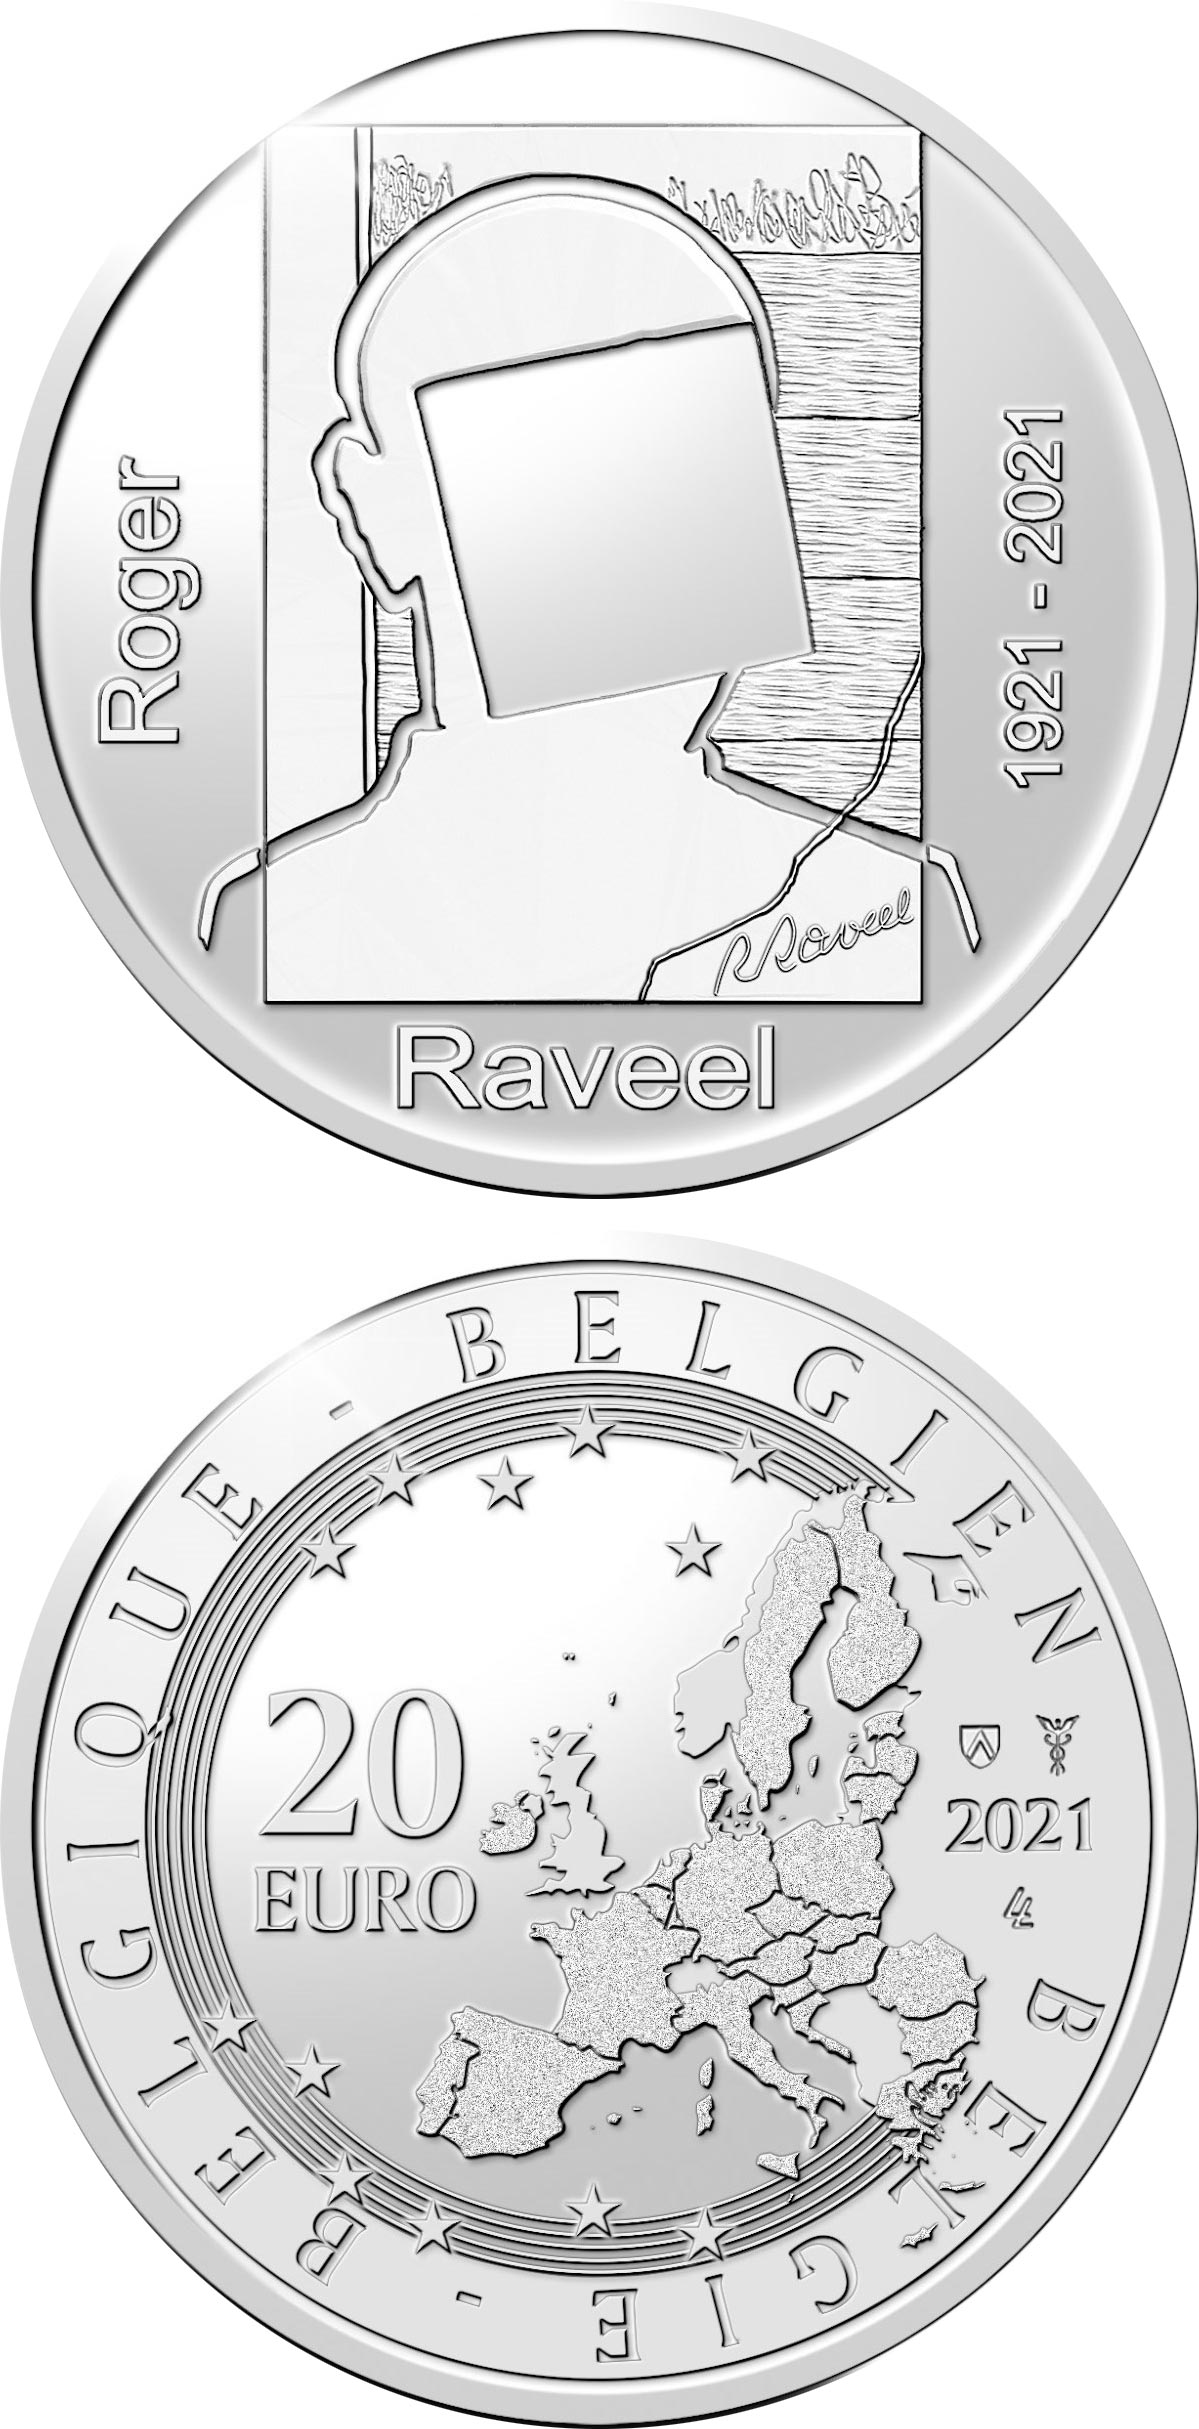 Image of 20 euro coin - 100th Birth Anniversary of Roger Raveel | Belgium 2021.  The Silver coin is of Proof quality.